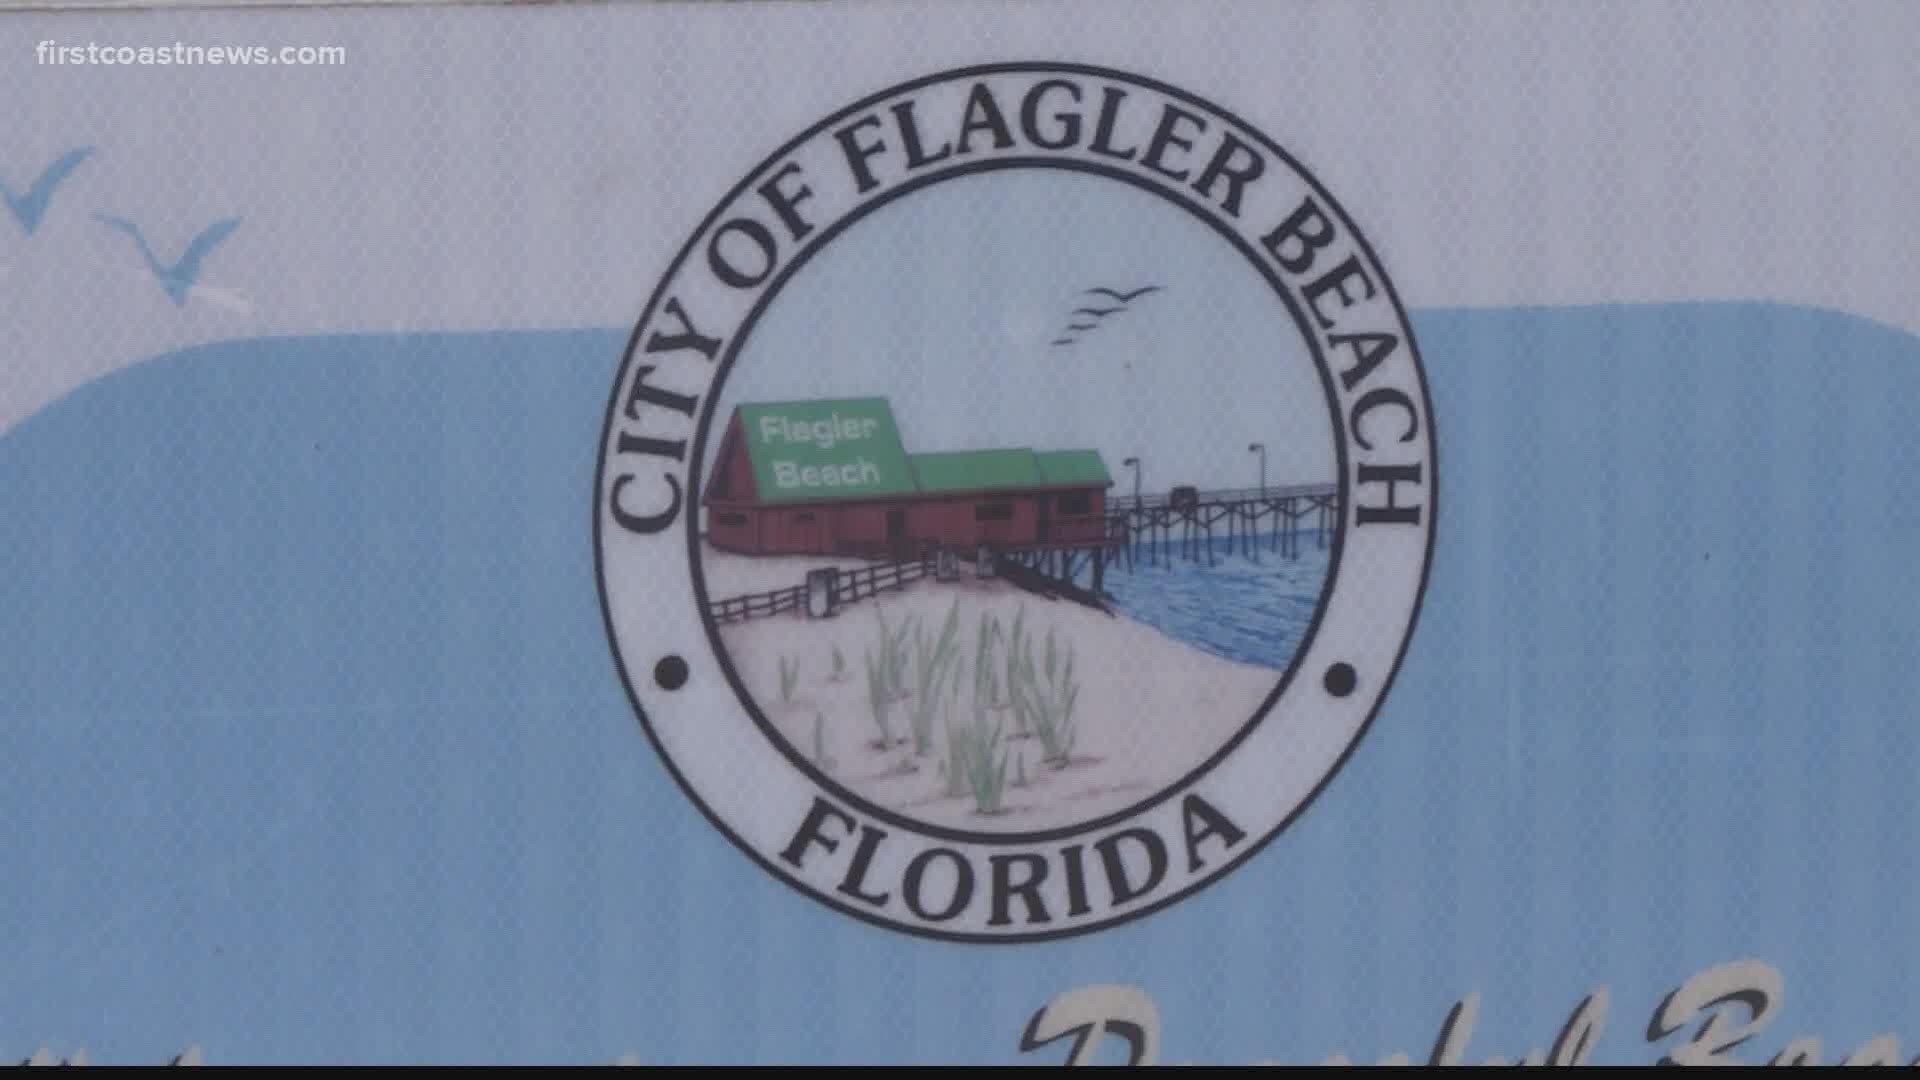 Flagler County beaches reopened Wednesday without restrictions but social distancing is still required.